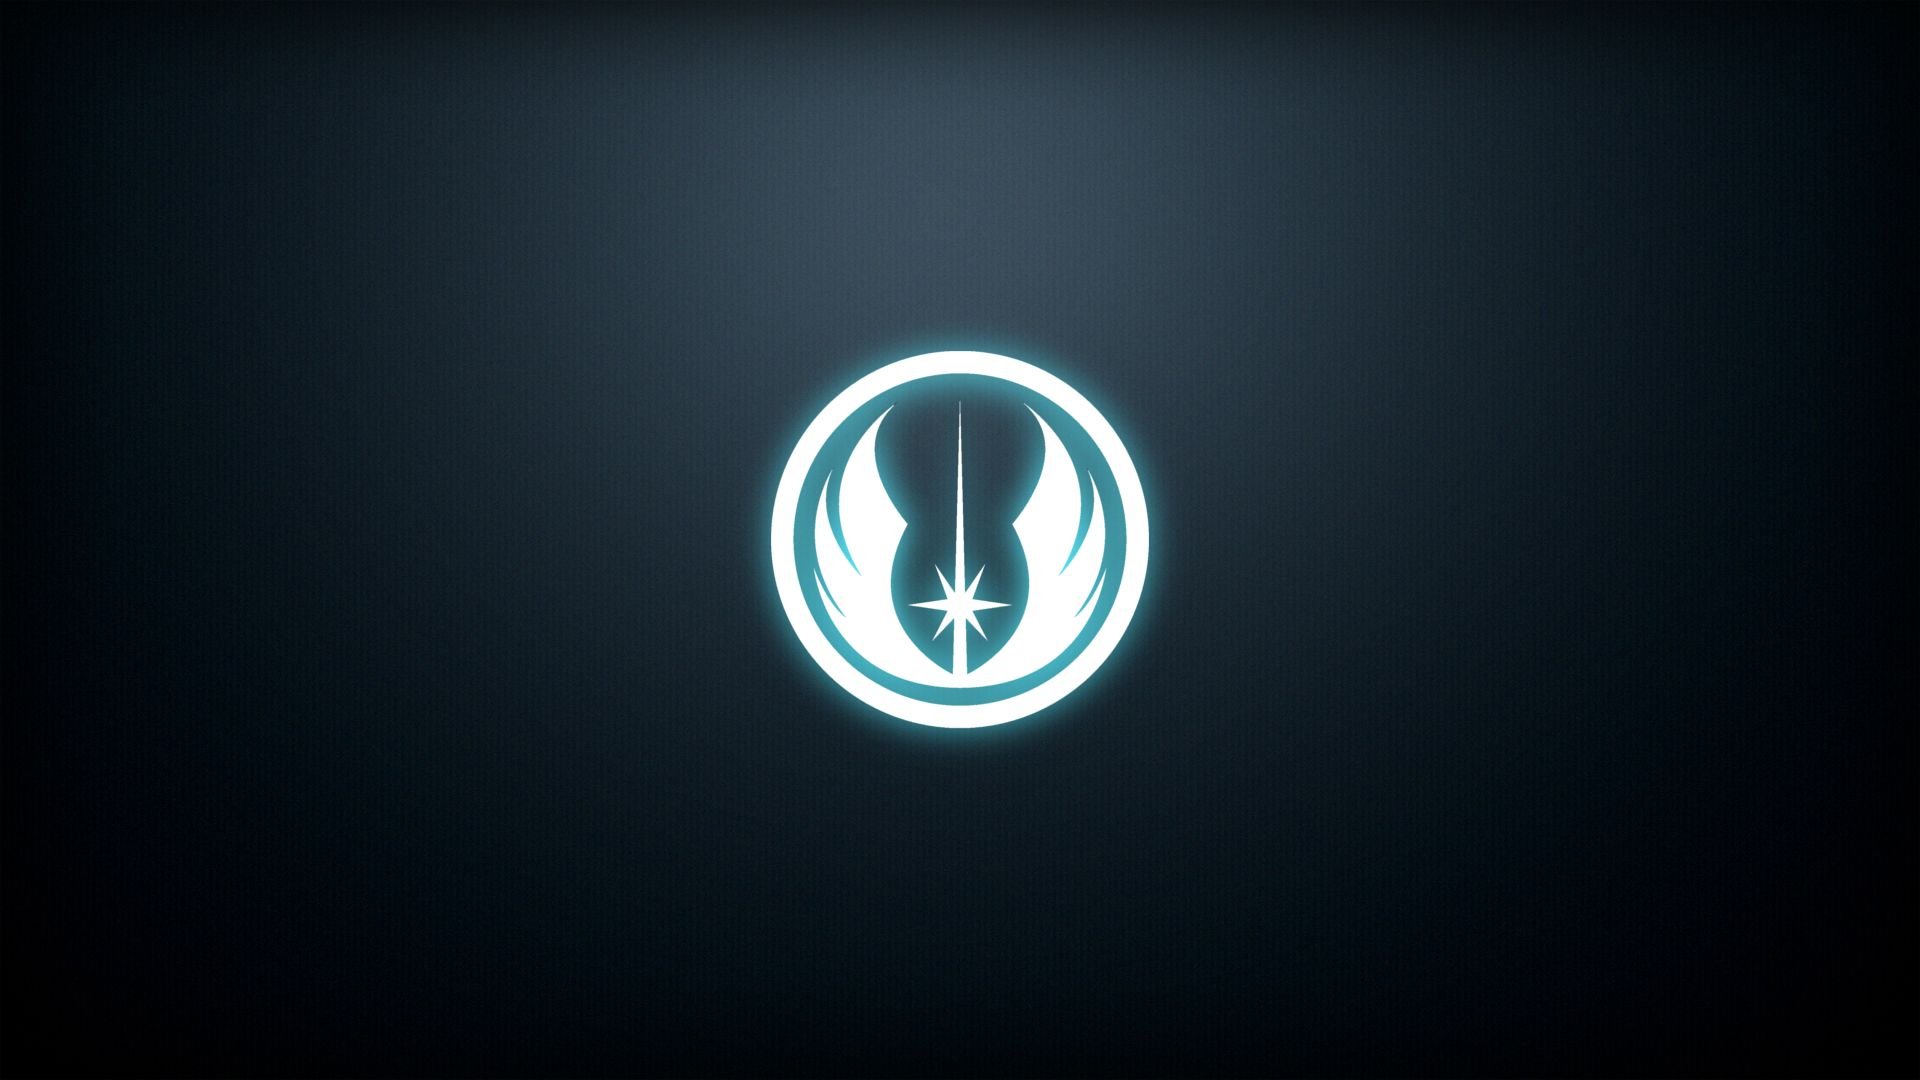 Star Wars Wallpapers with Jedi Symbol The Art Mad Wallpapers 1920x1080